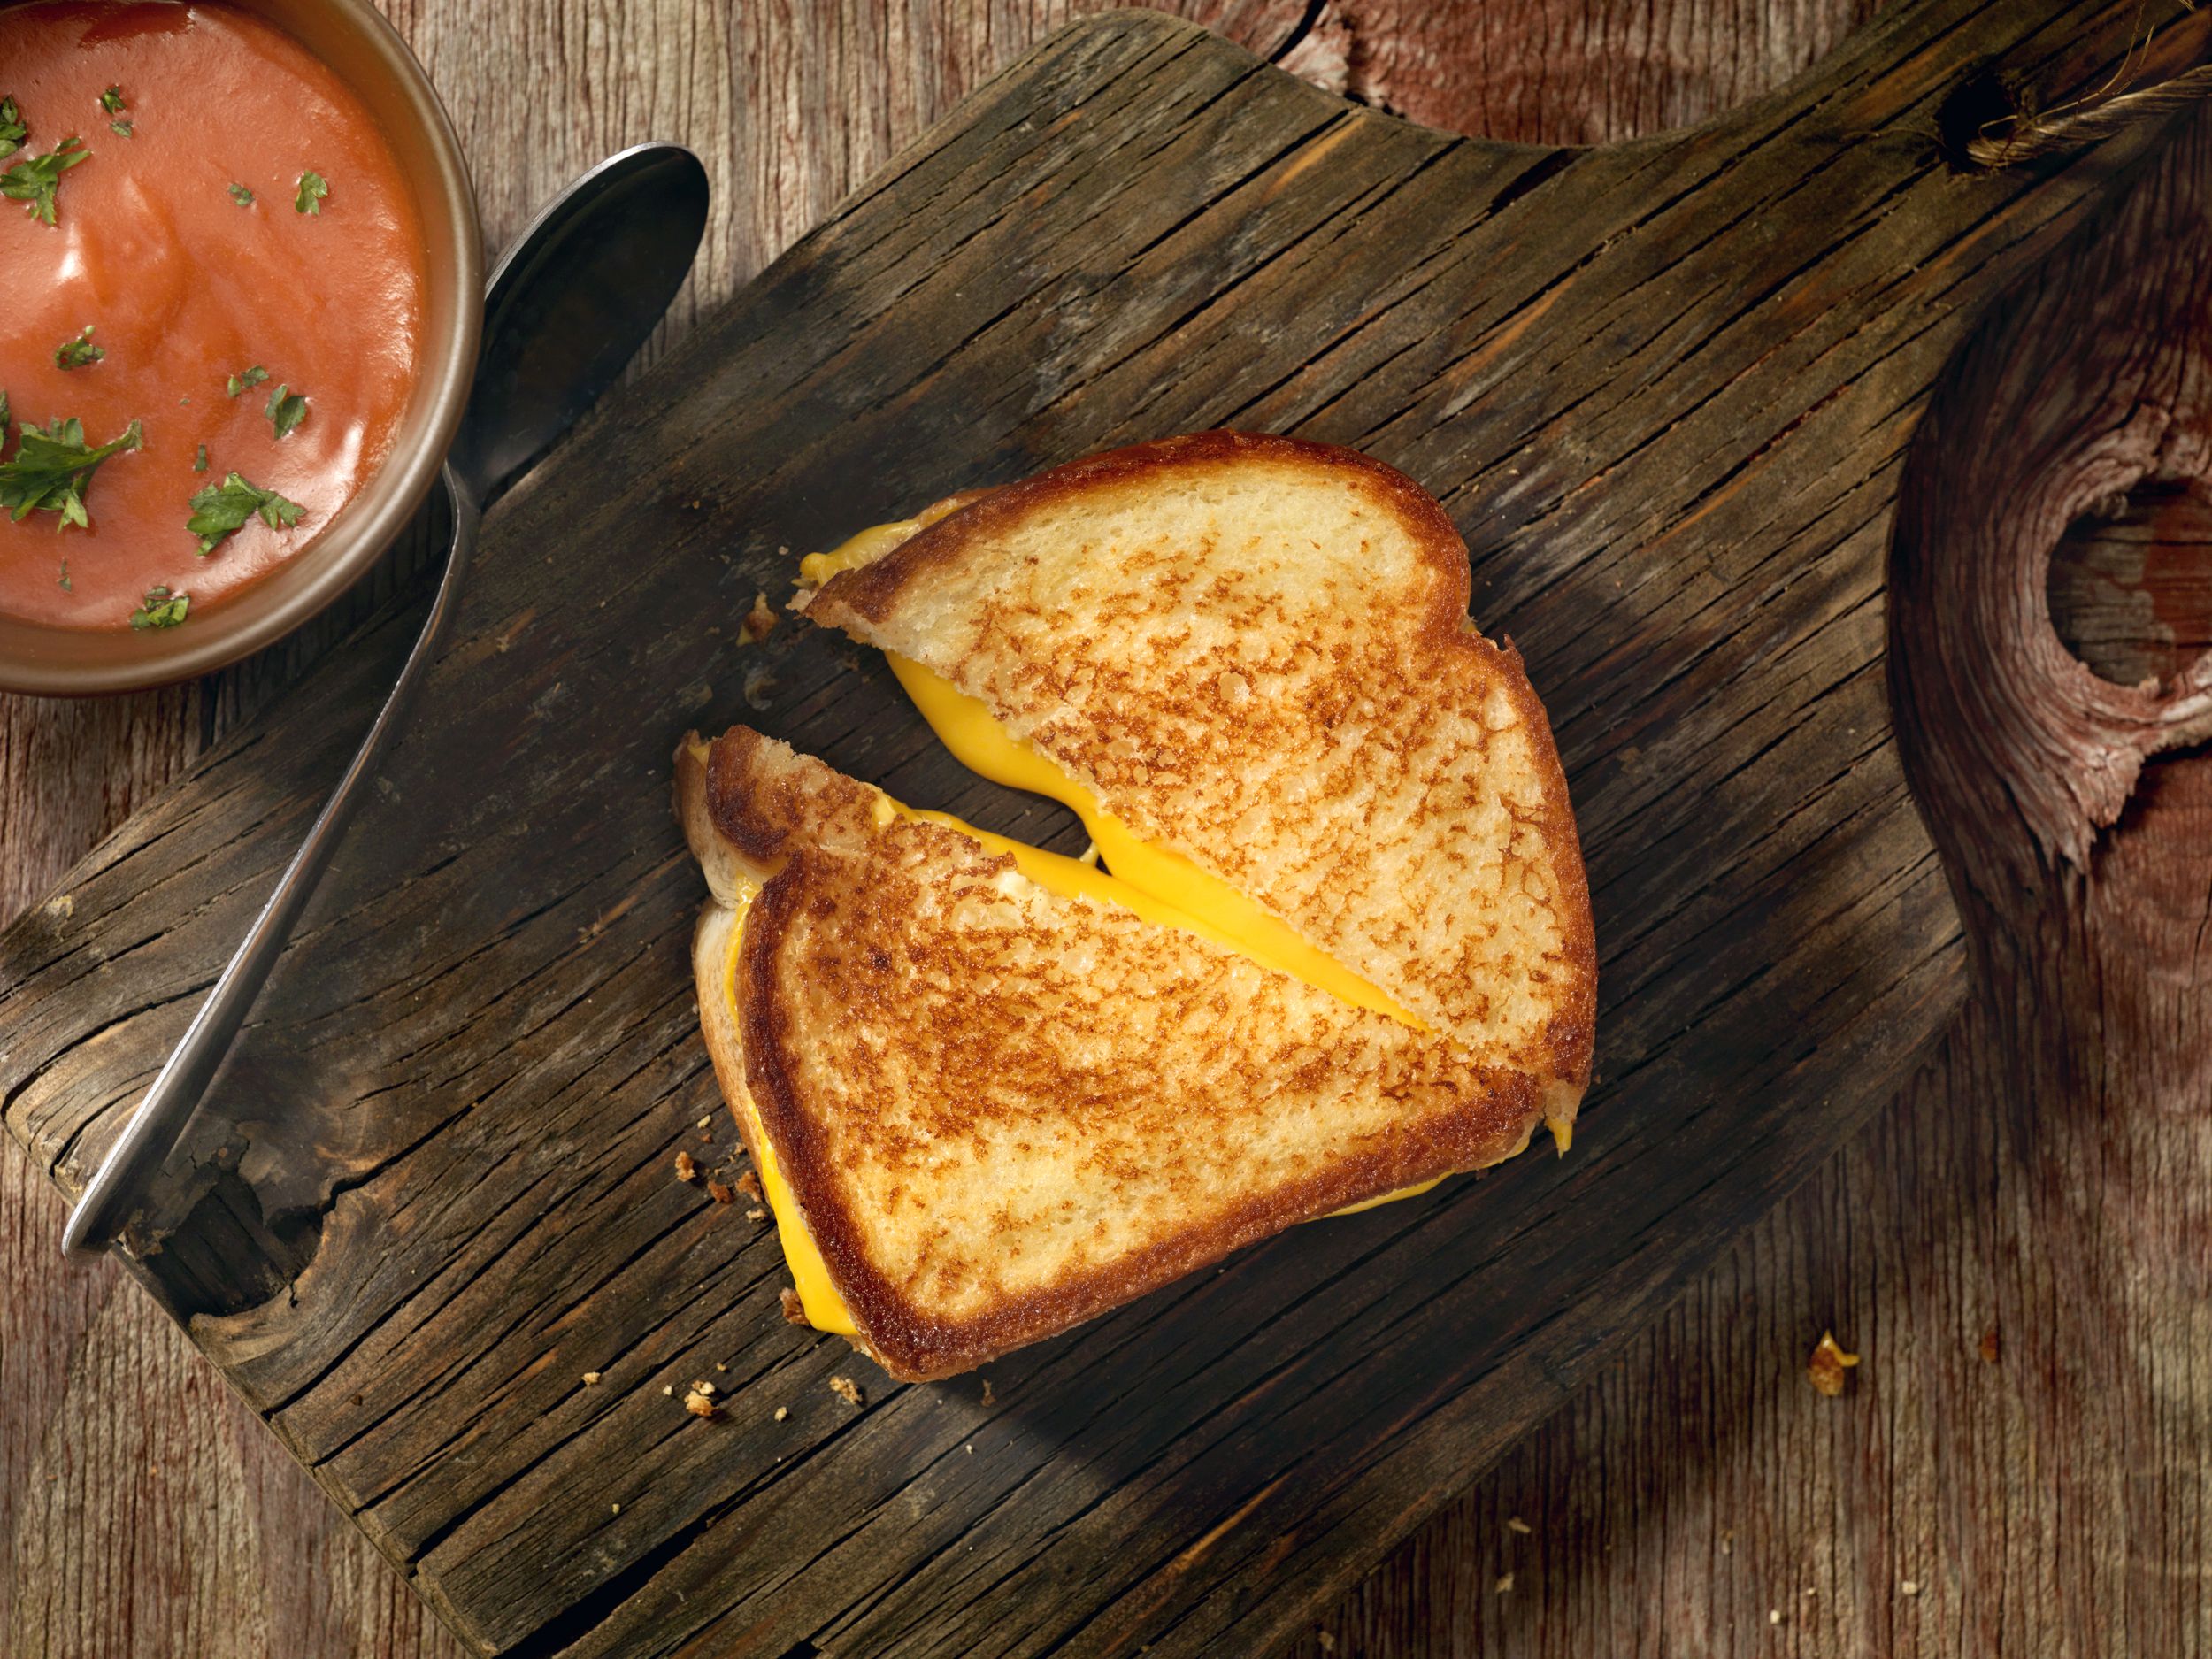 For the ultimate grilled cheese, use .nbcnews.com